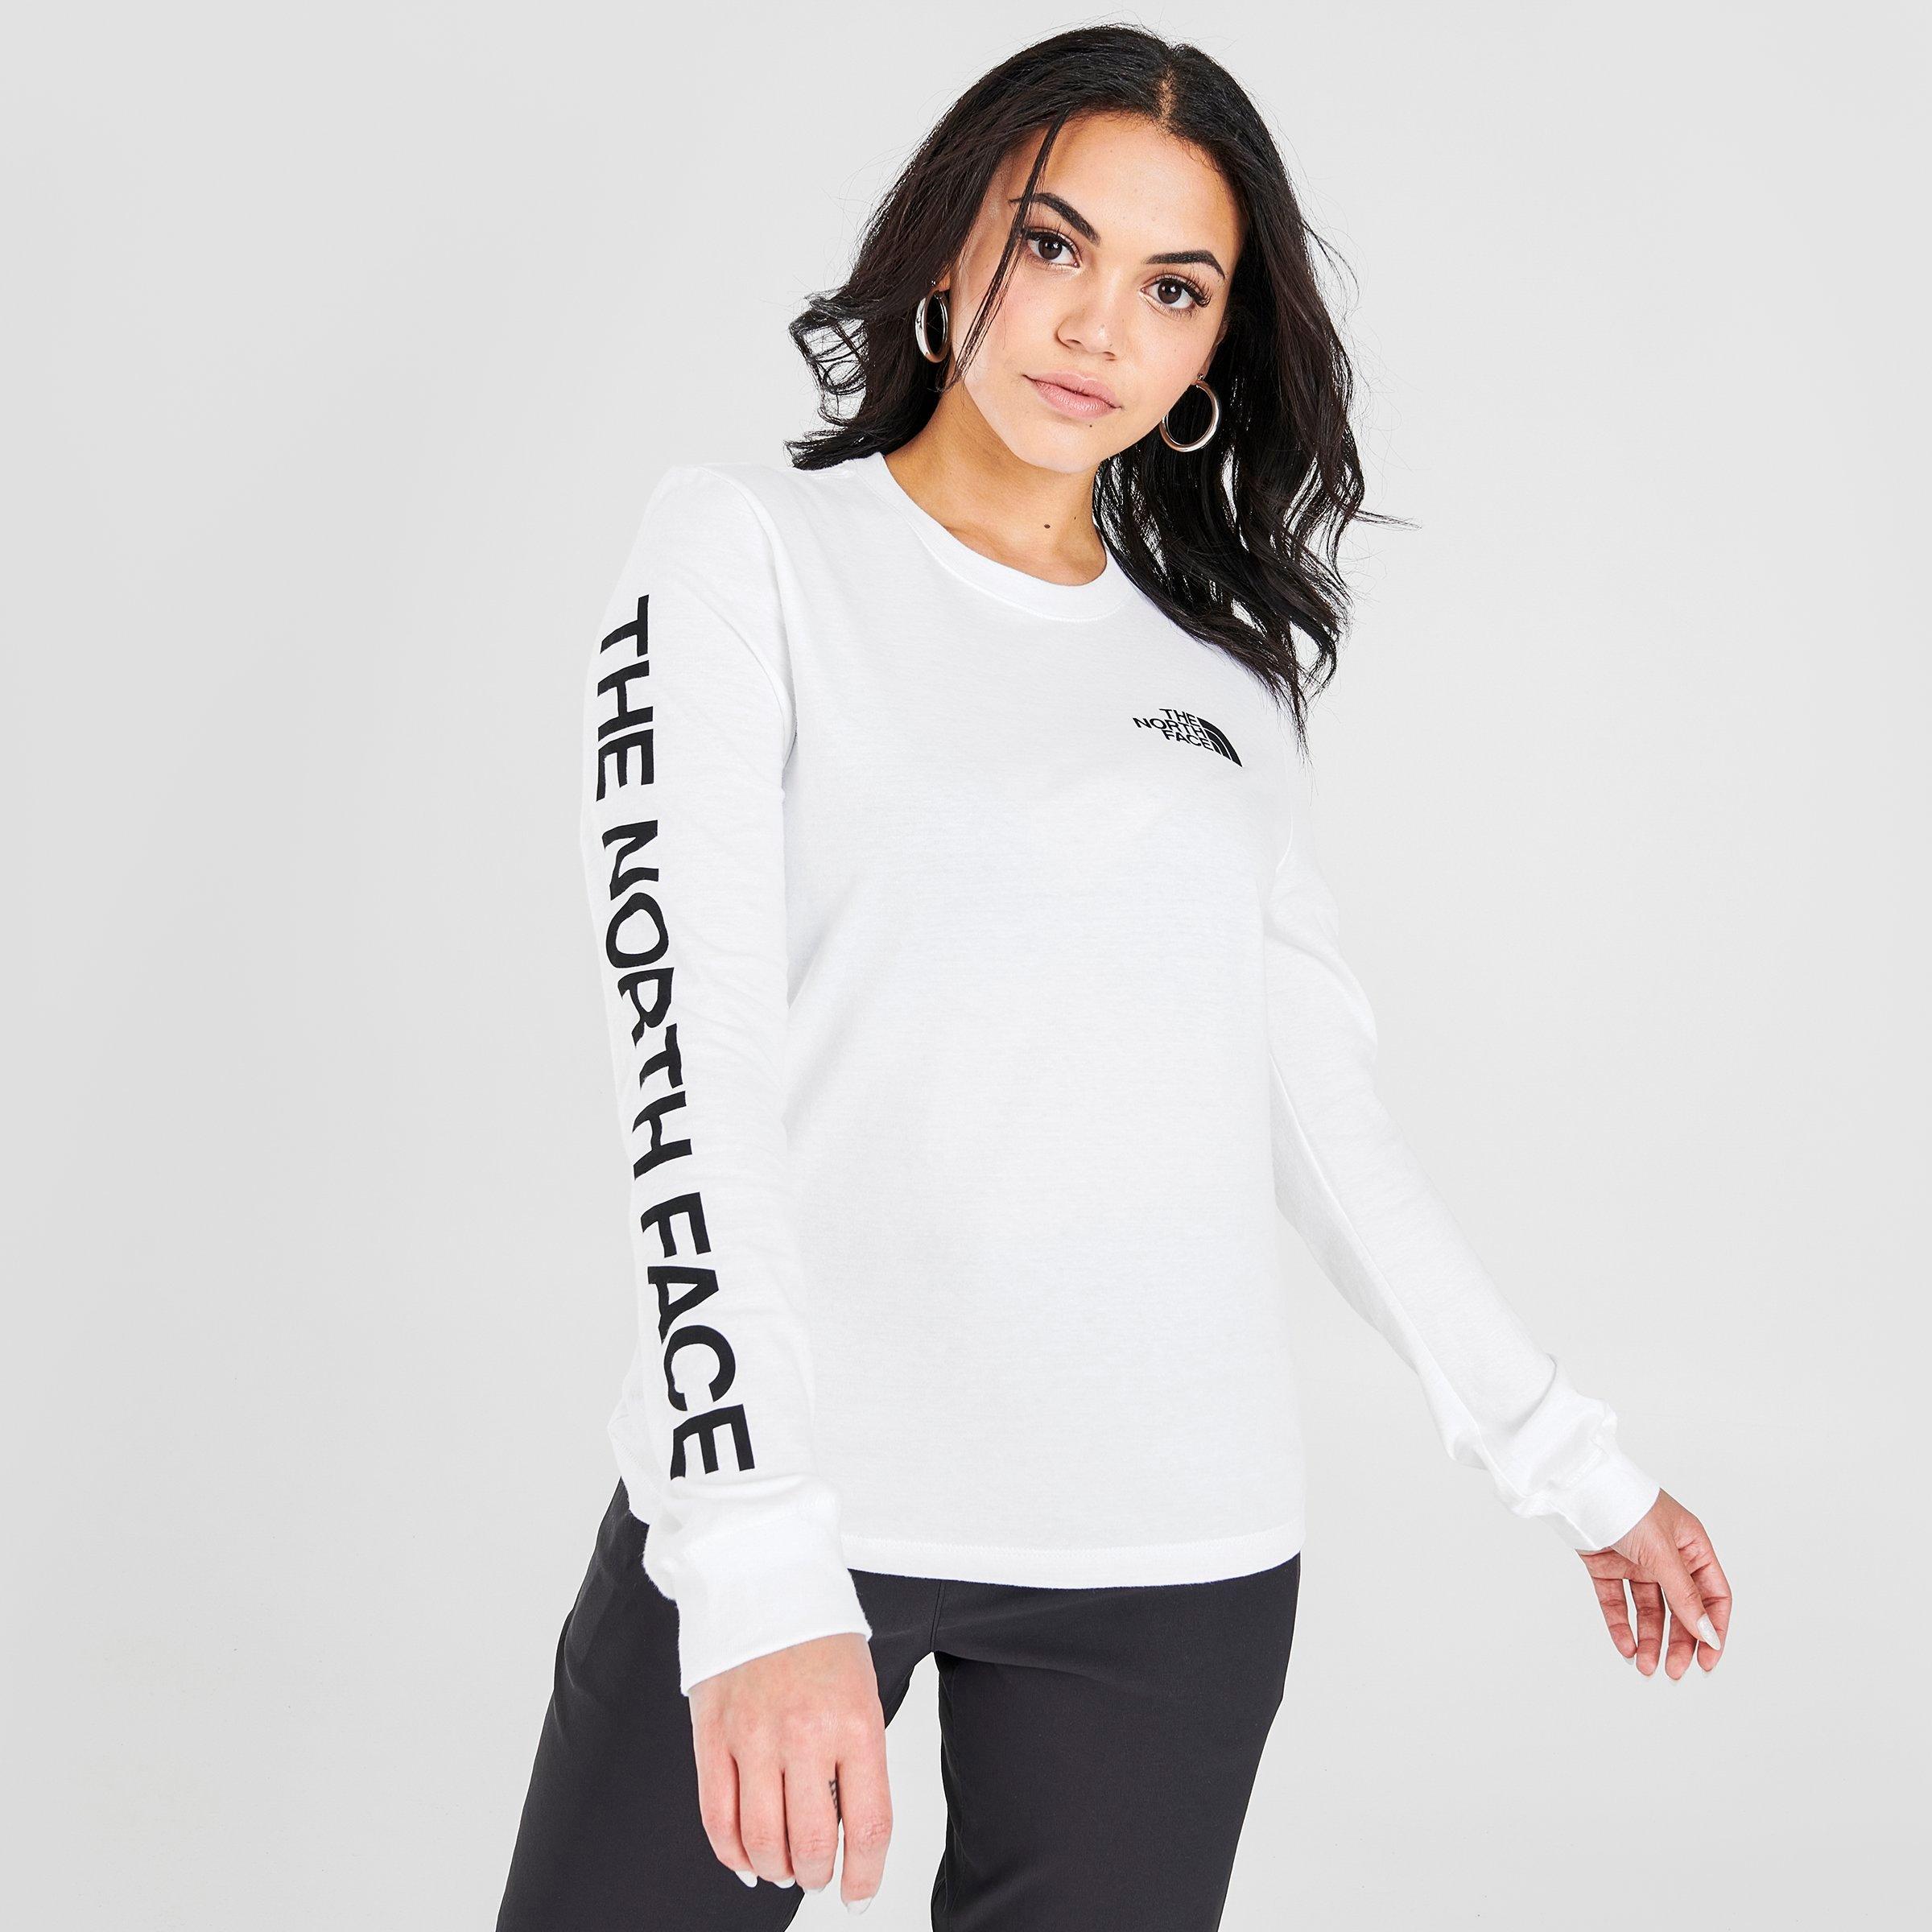 Women's Long Sleeve North Face Shirts Flash Sales, 50% OFF | www 